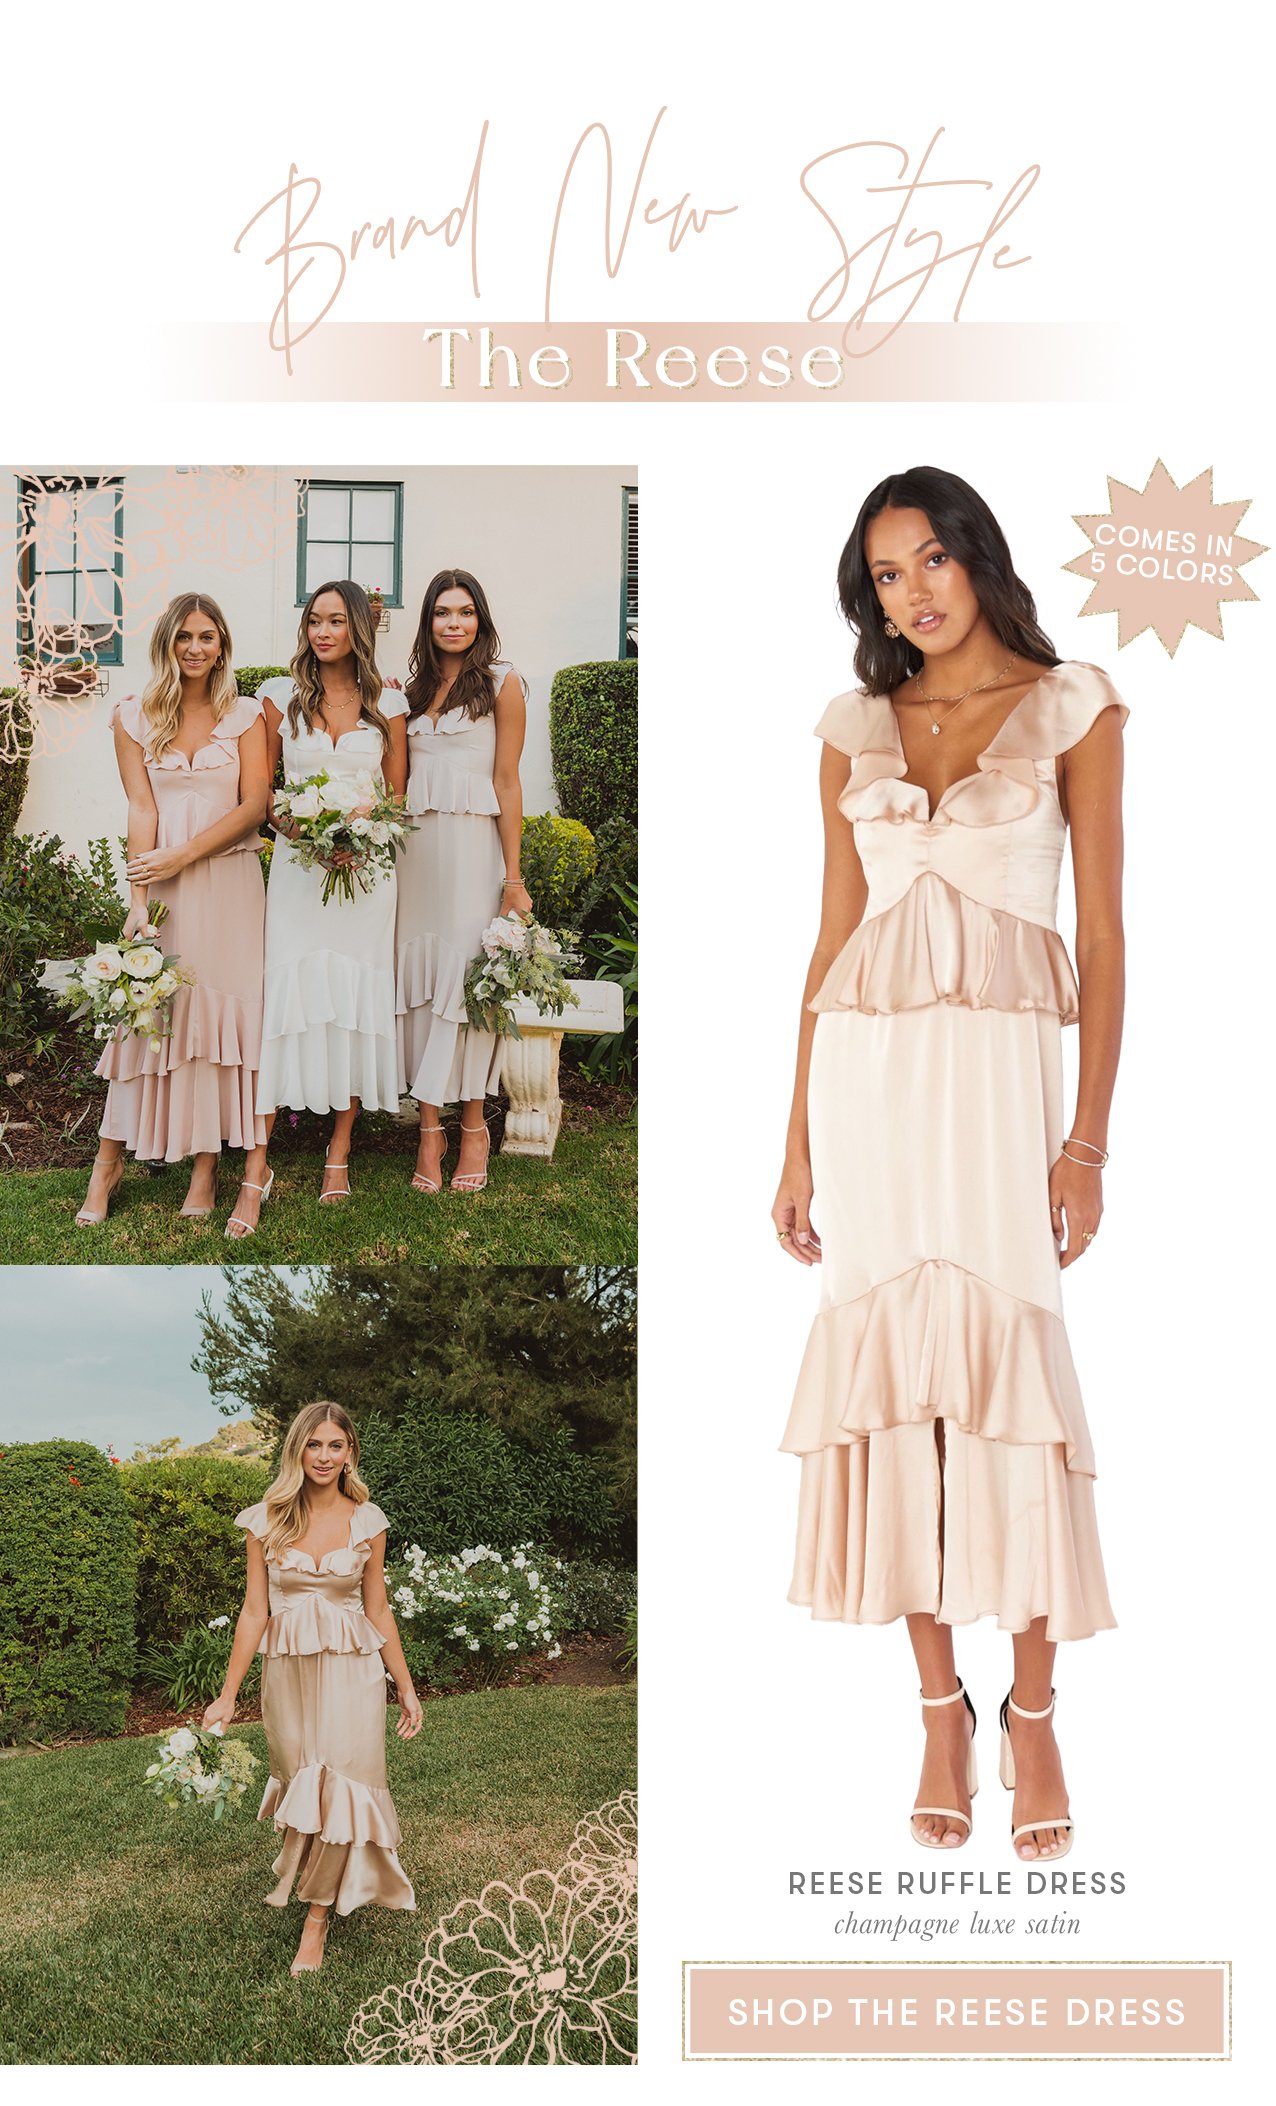 The Spring Bridesmaids Collection is ...